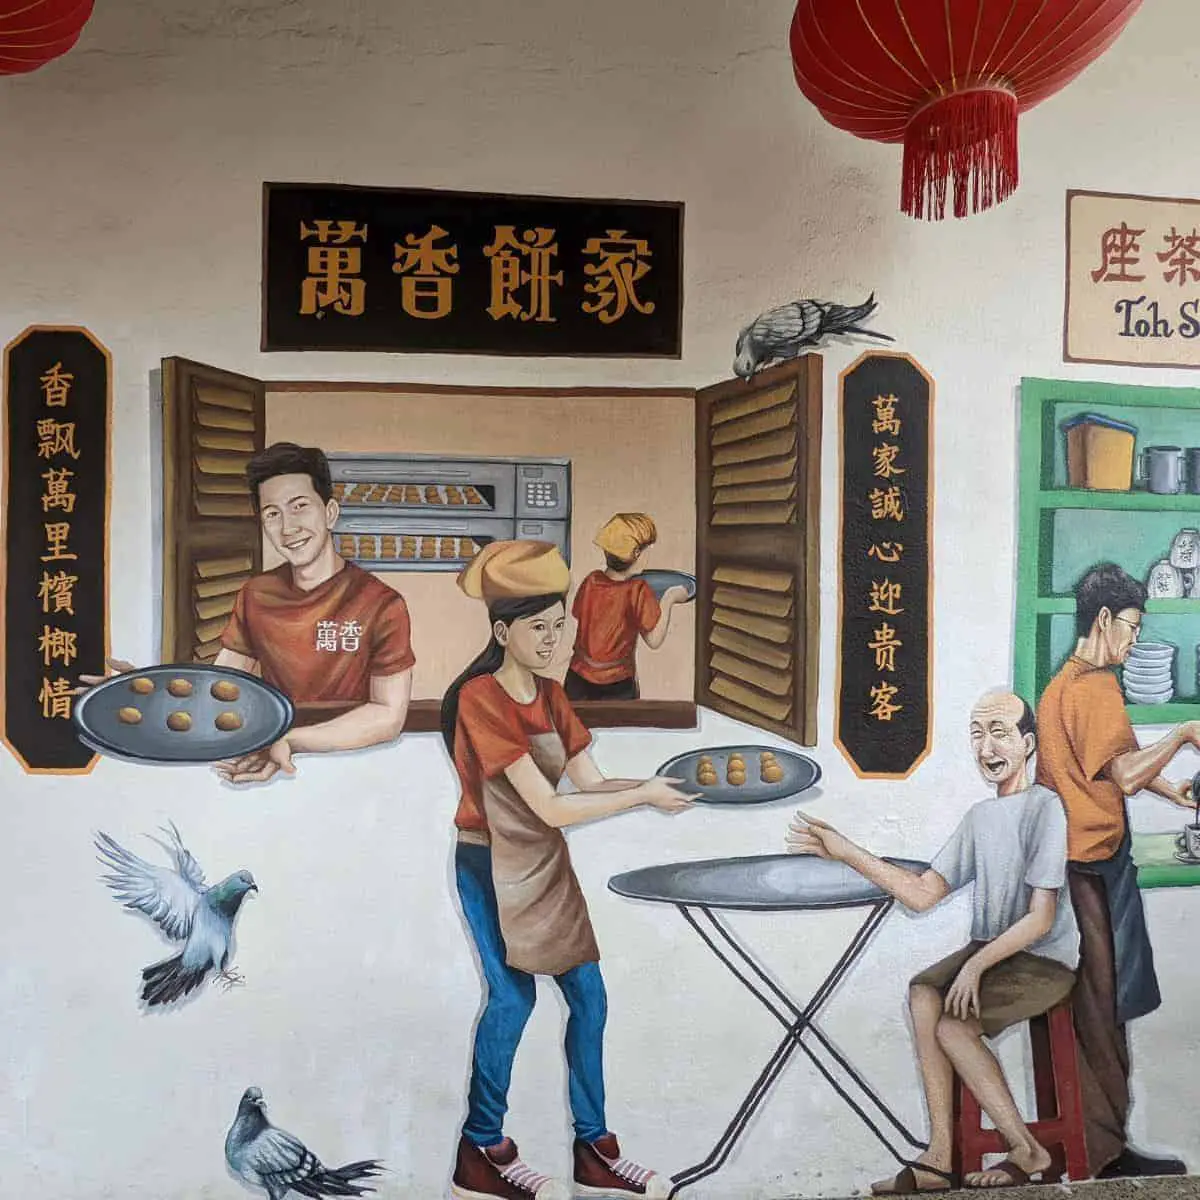 Mural outside of Toh Soon café and Ban Heang 